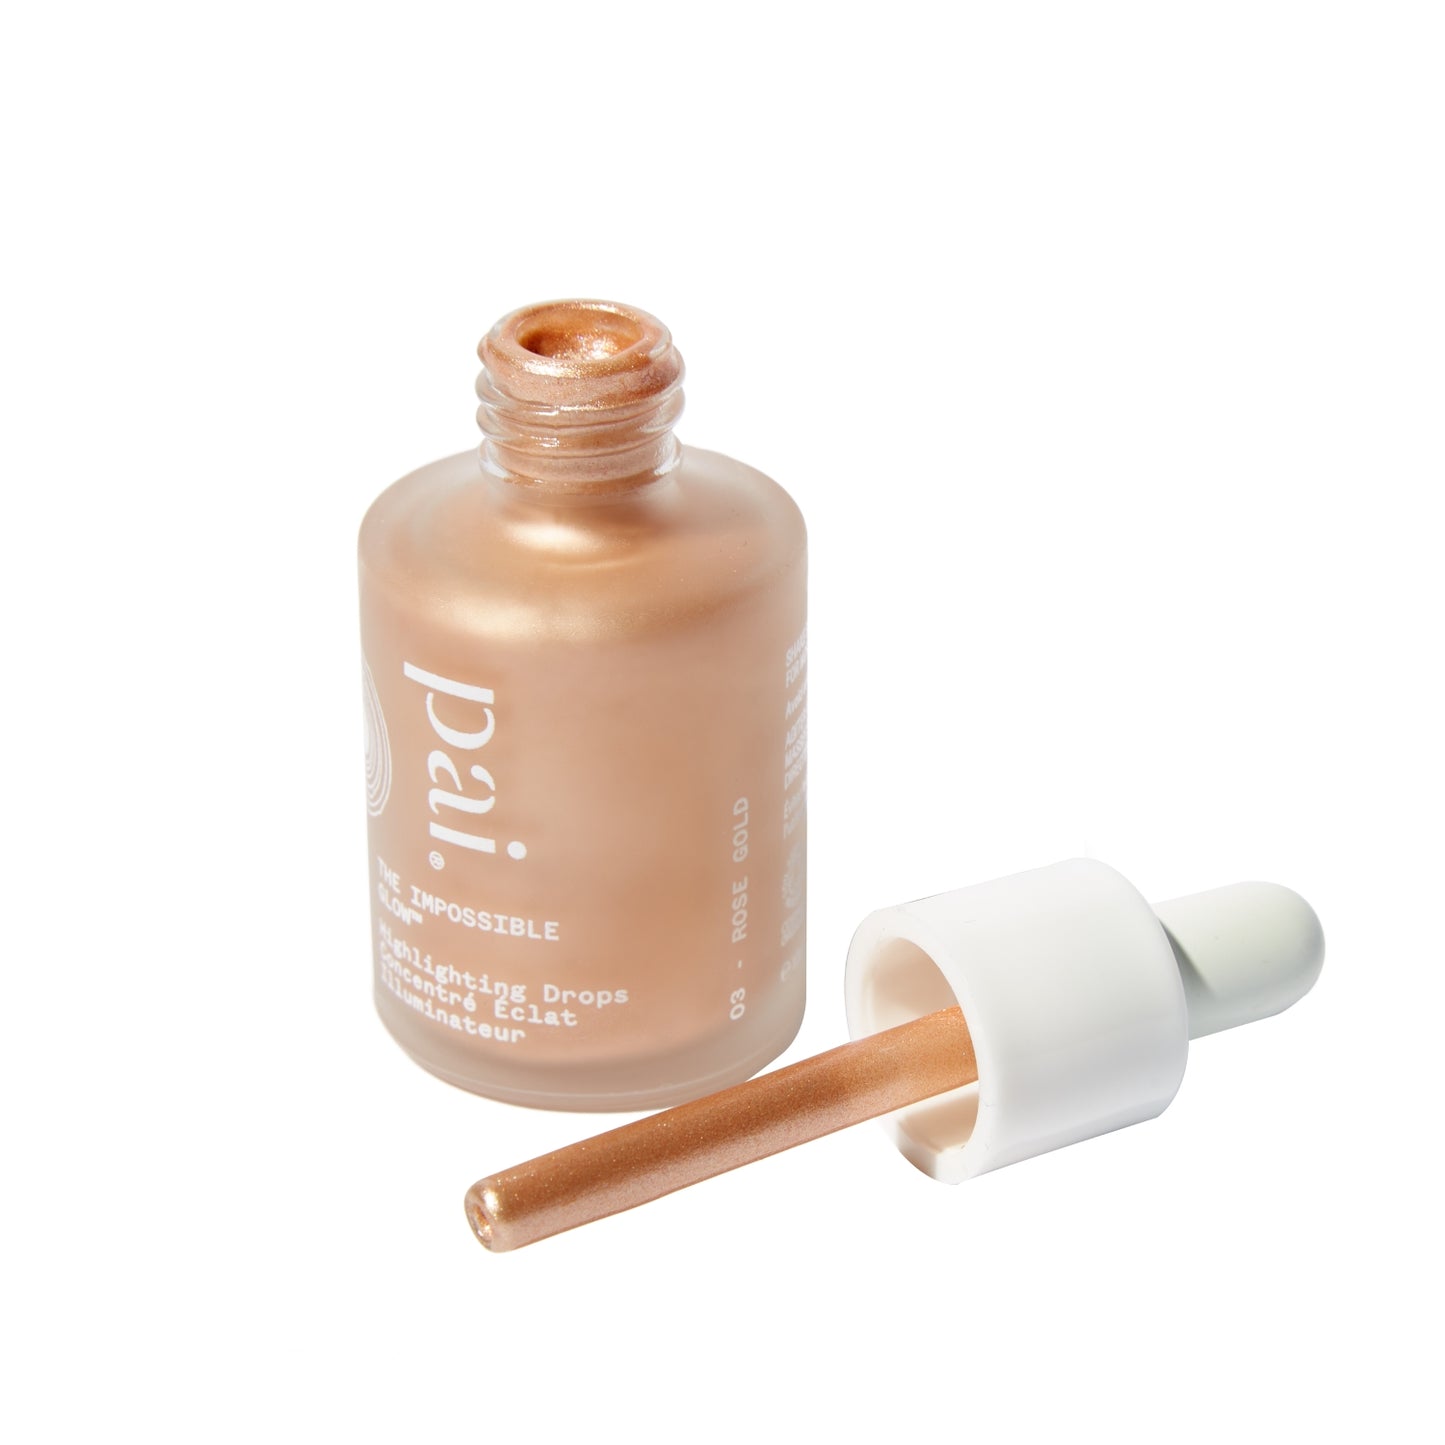 Pai - The Impossible Glow 03 Rose Gold 10ml